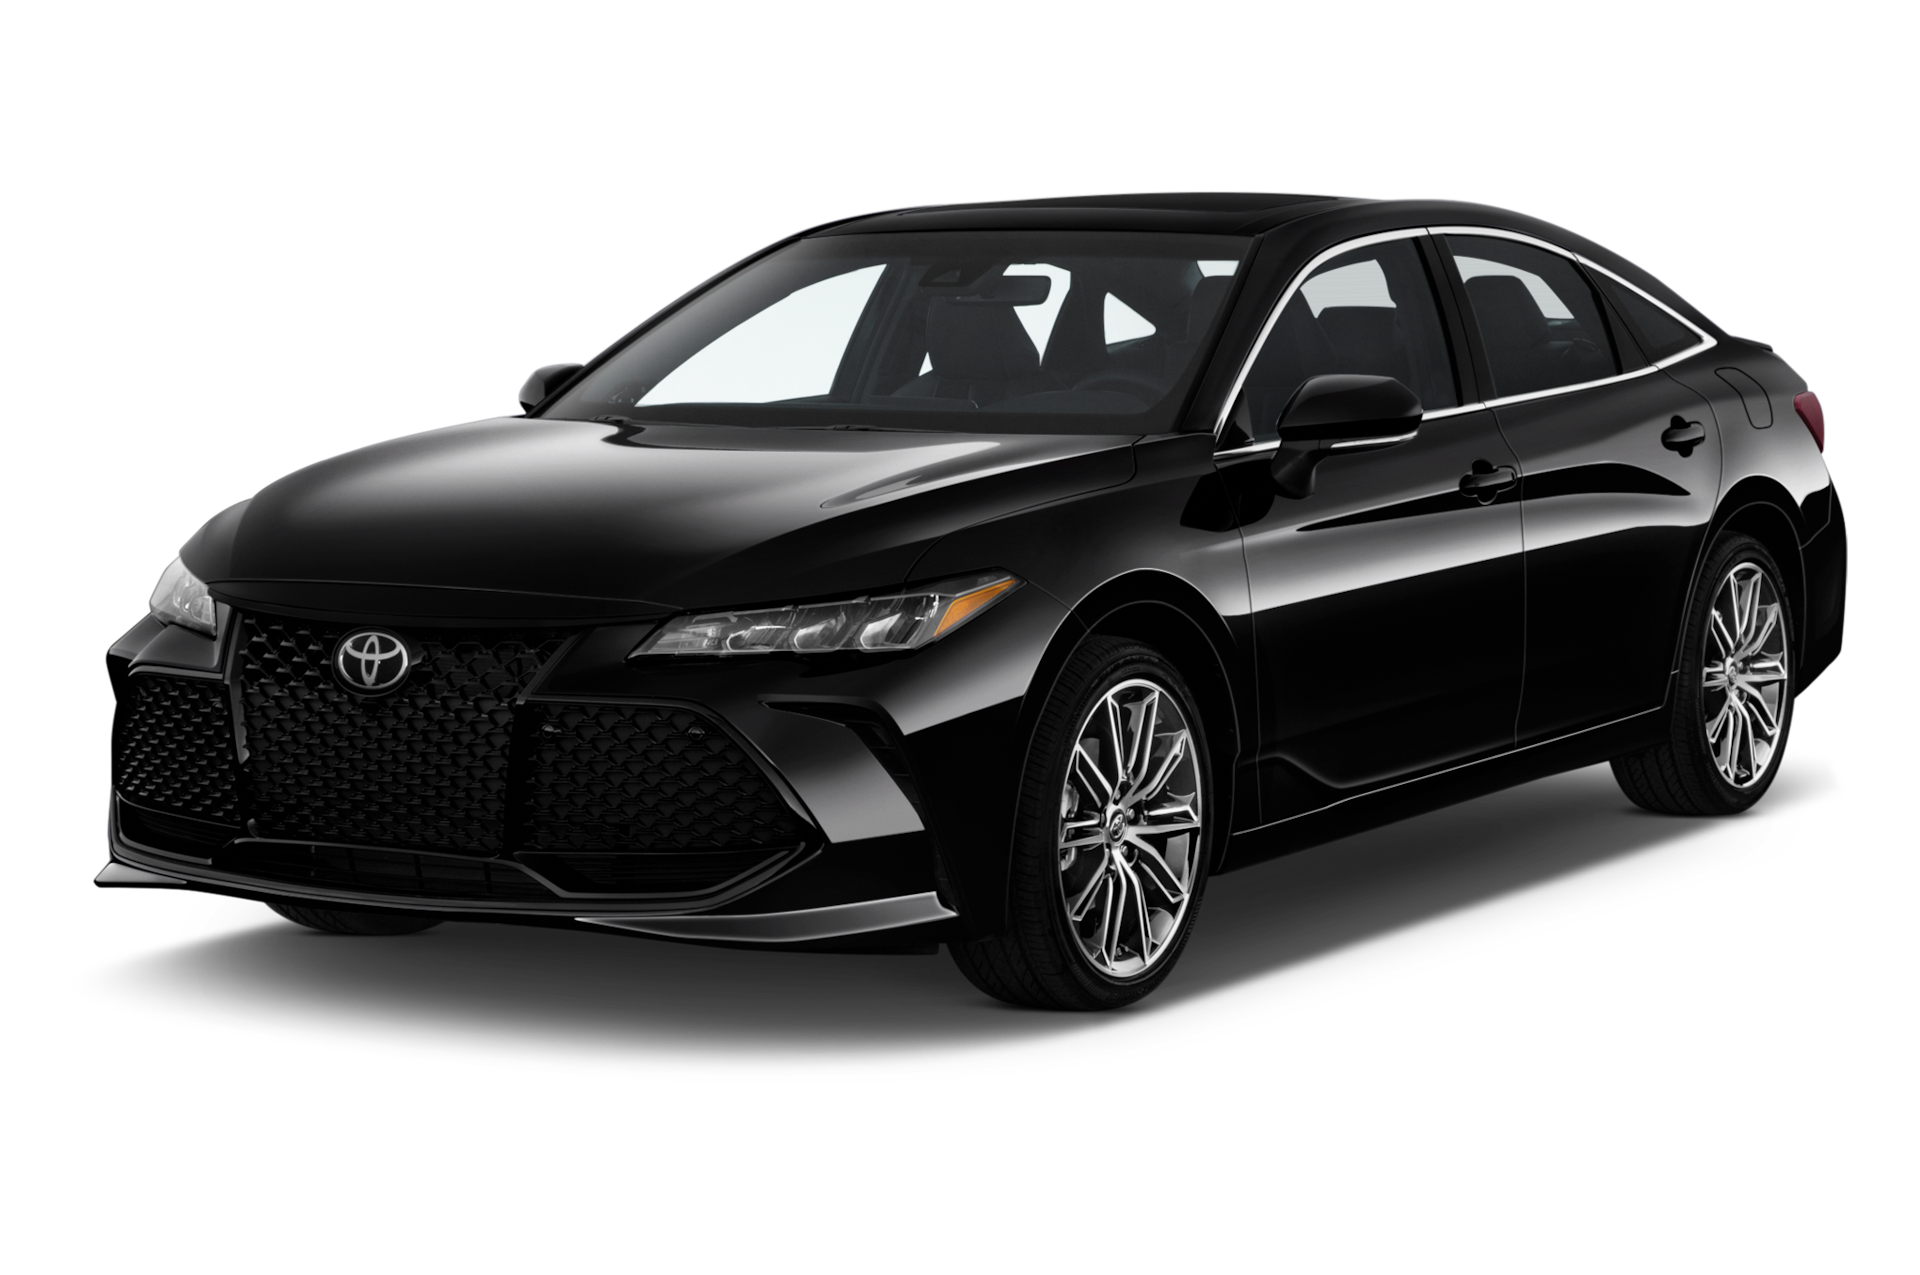 2020 Toyota Avalon Prices, Reviews, and Photos - MotorTrend